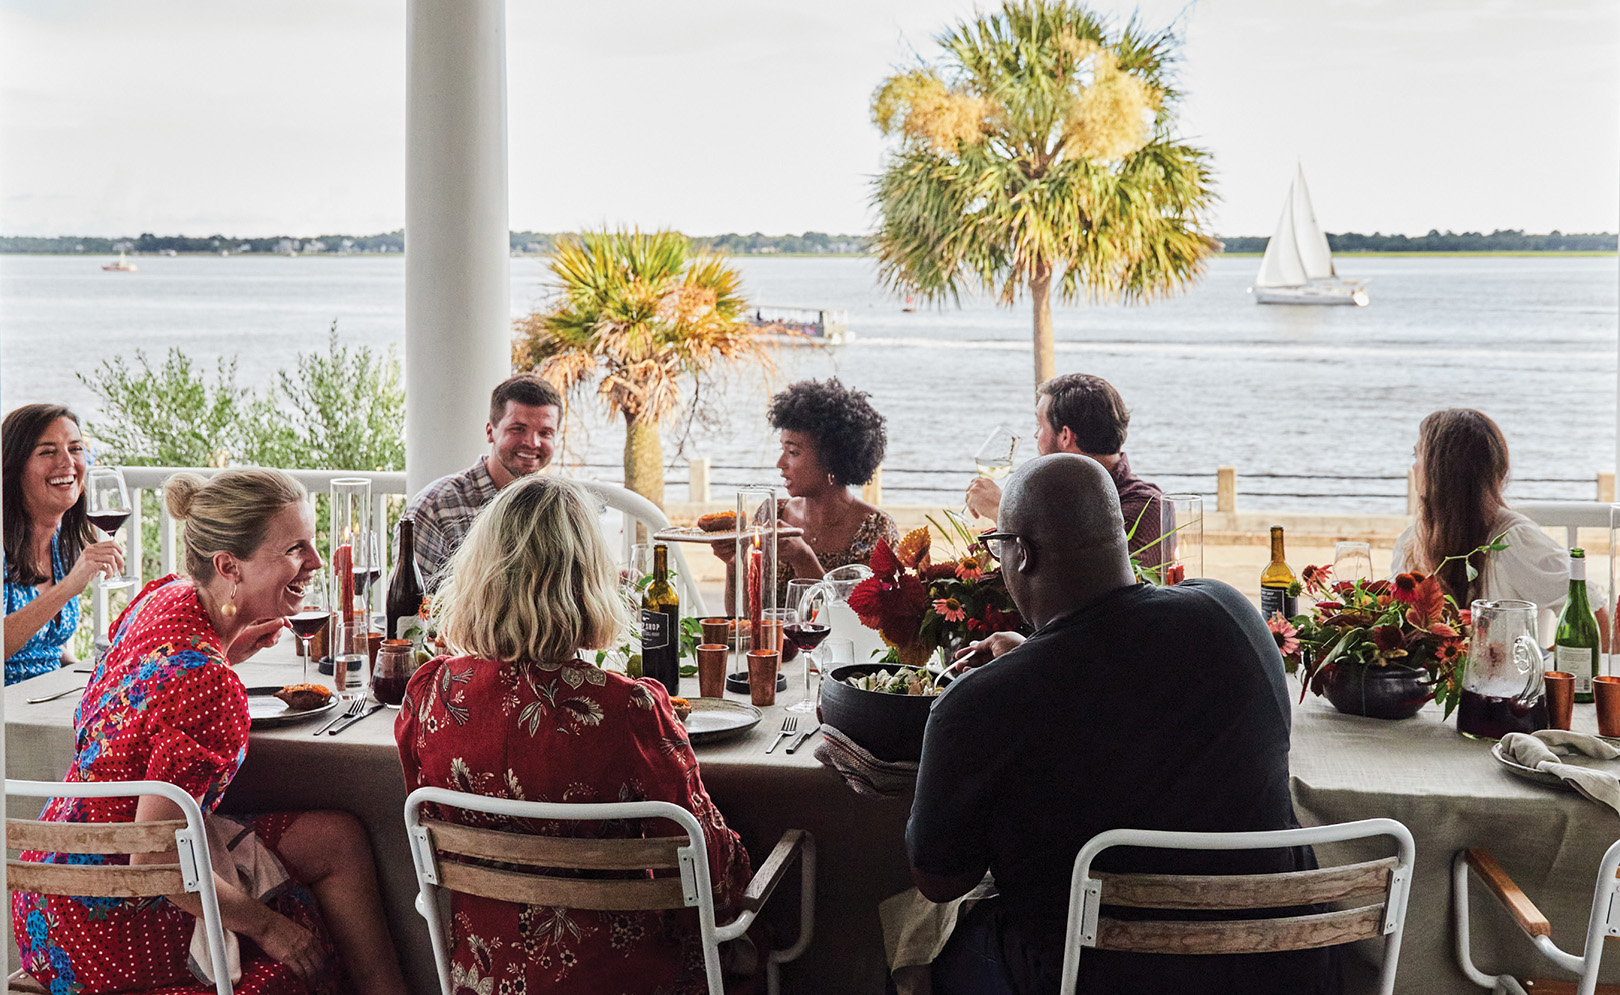 With its Charleston Harbor vantage and welcome breezes, Molly and Ted Fienning’s front porch makes a cool spot for a hot (sauce) party.